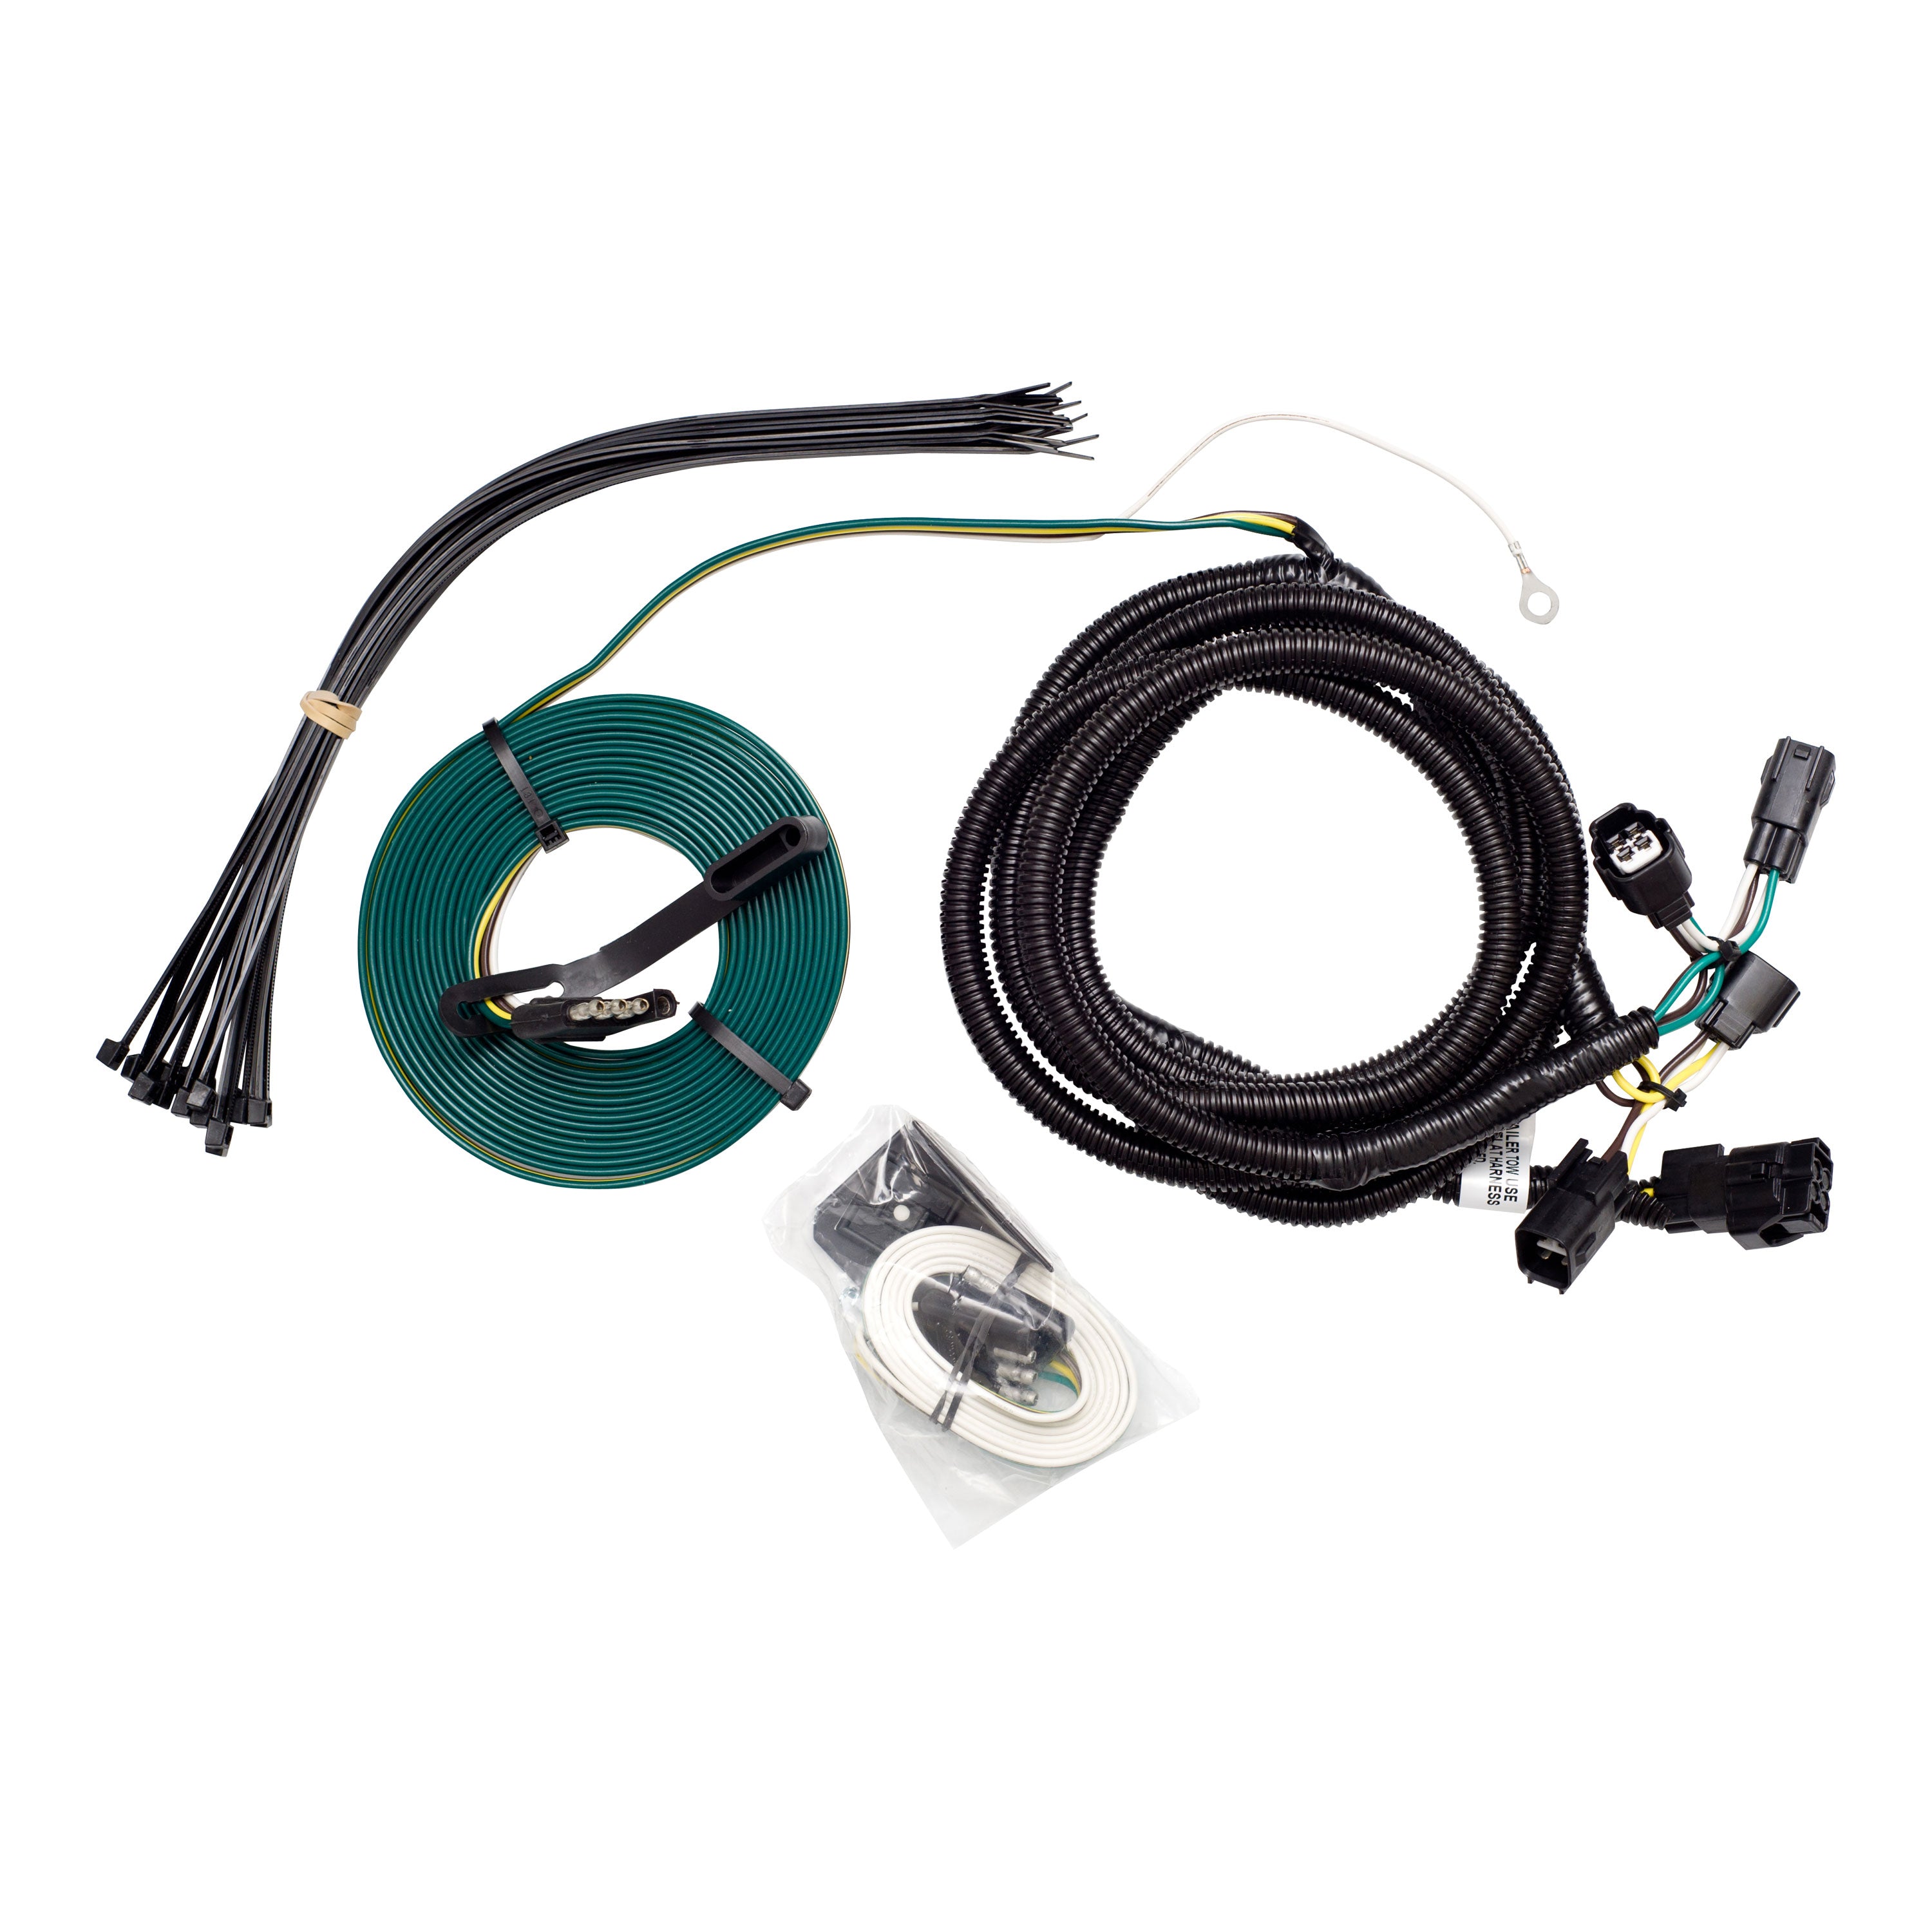 Demco 9523143 Towed Connector Vehicle Wiring Kit for Jeep Liberty '02-'07